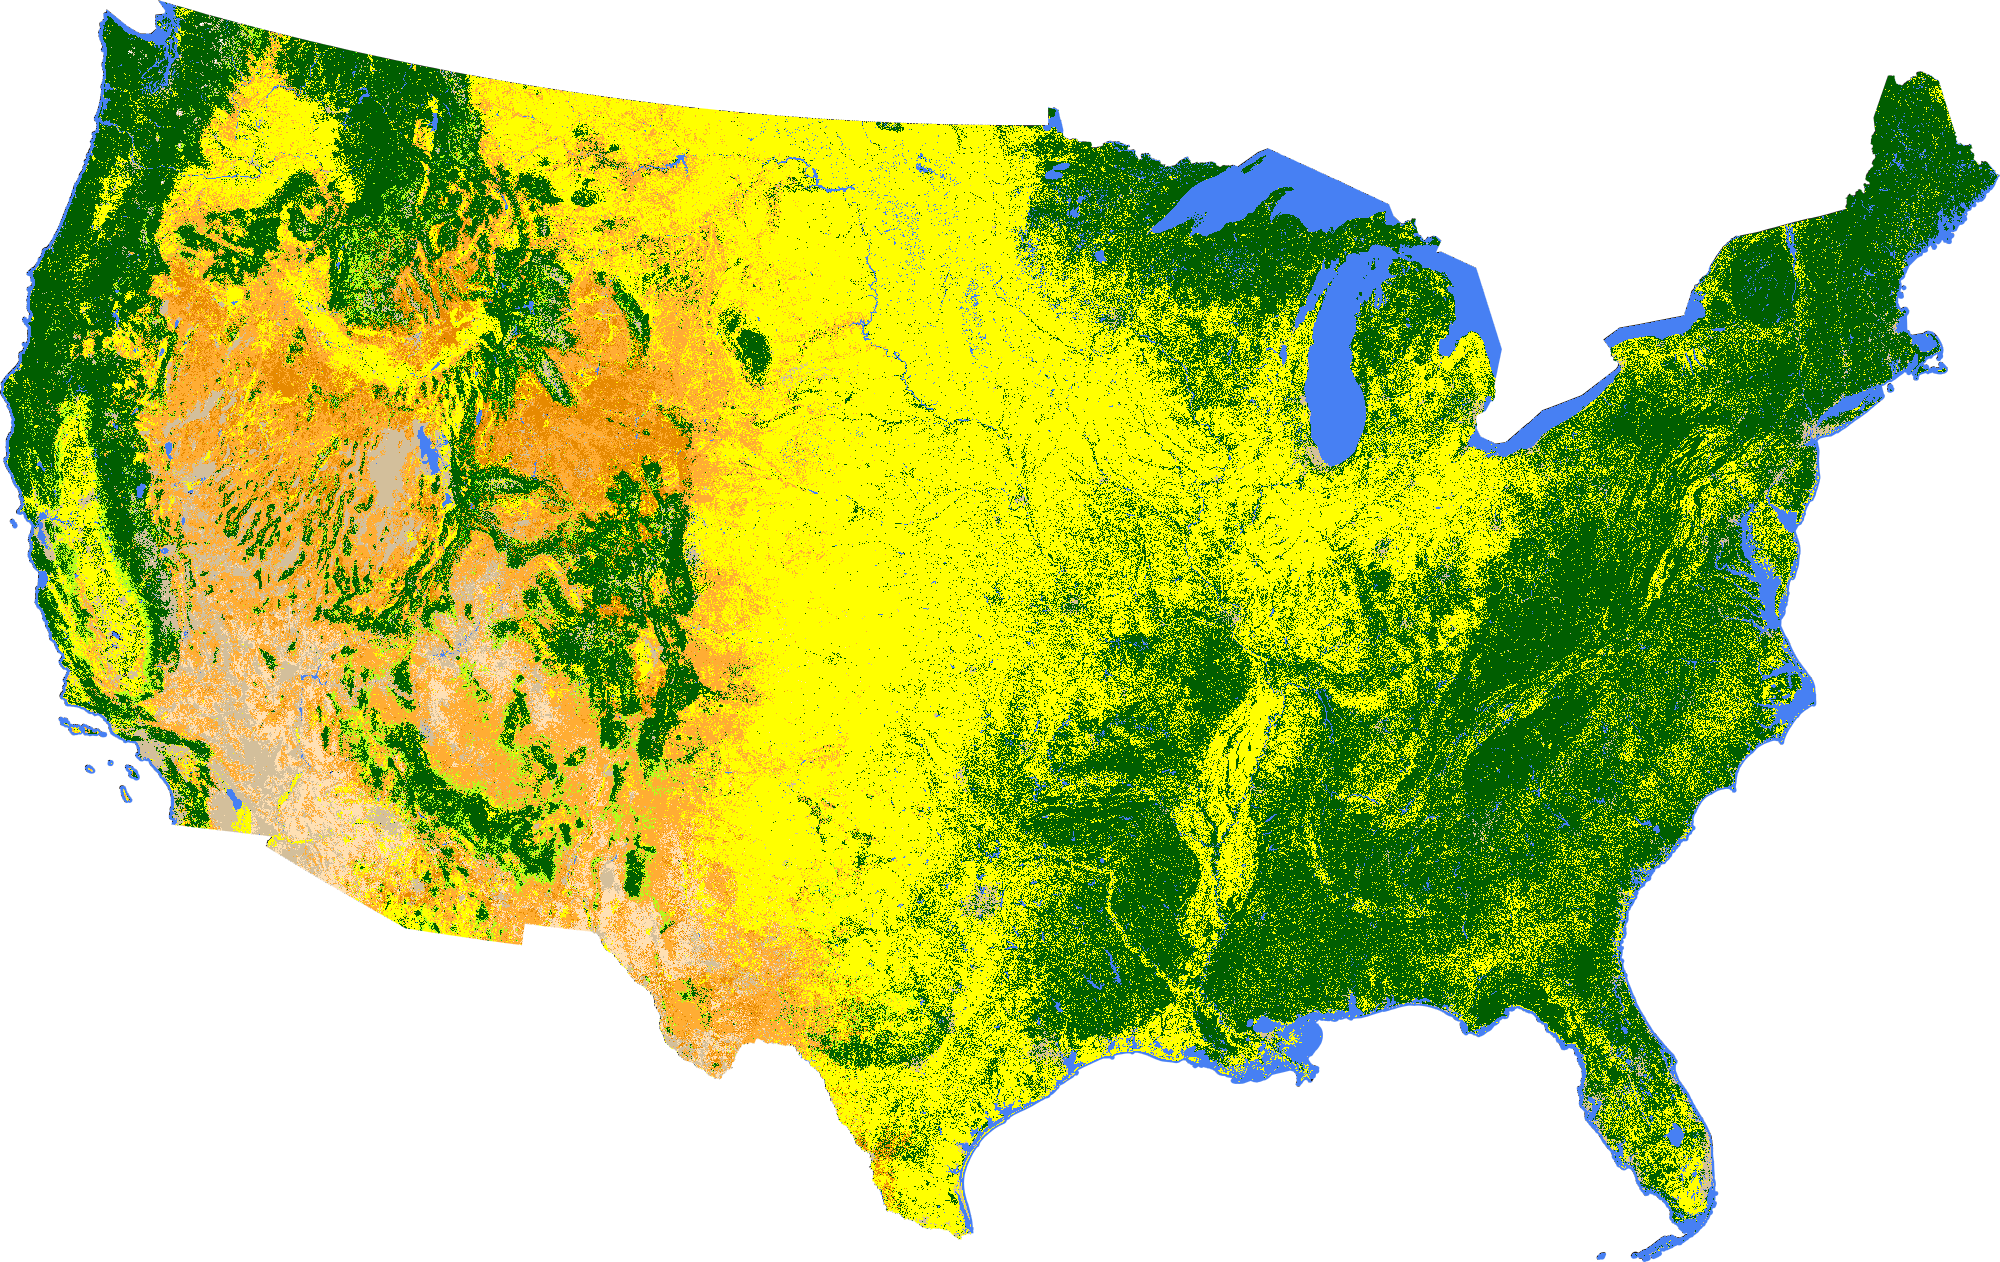 Map of LCMS Land Cover output across the U.S.